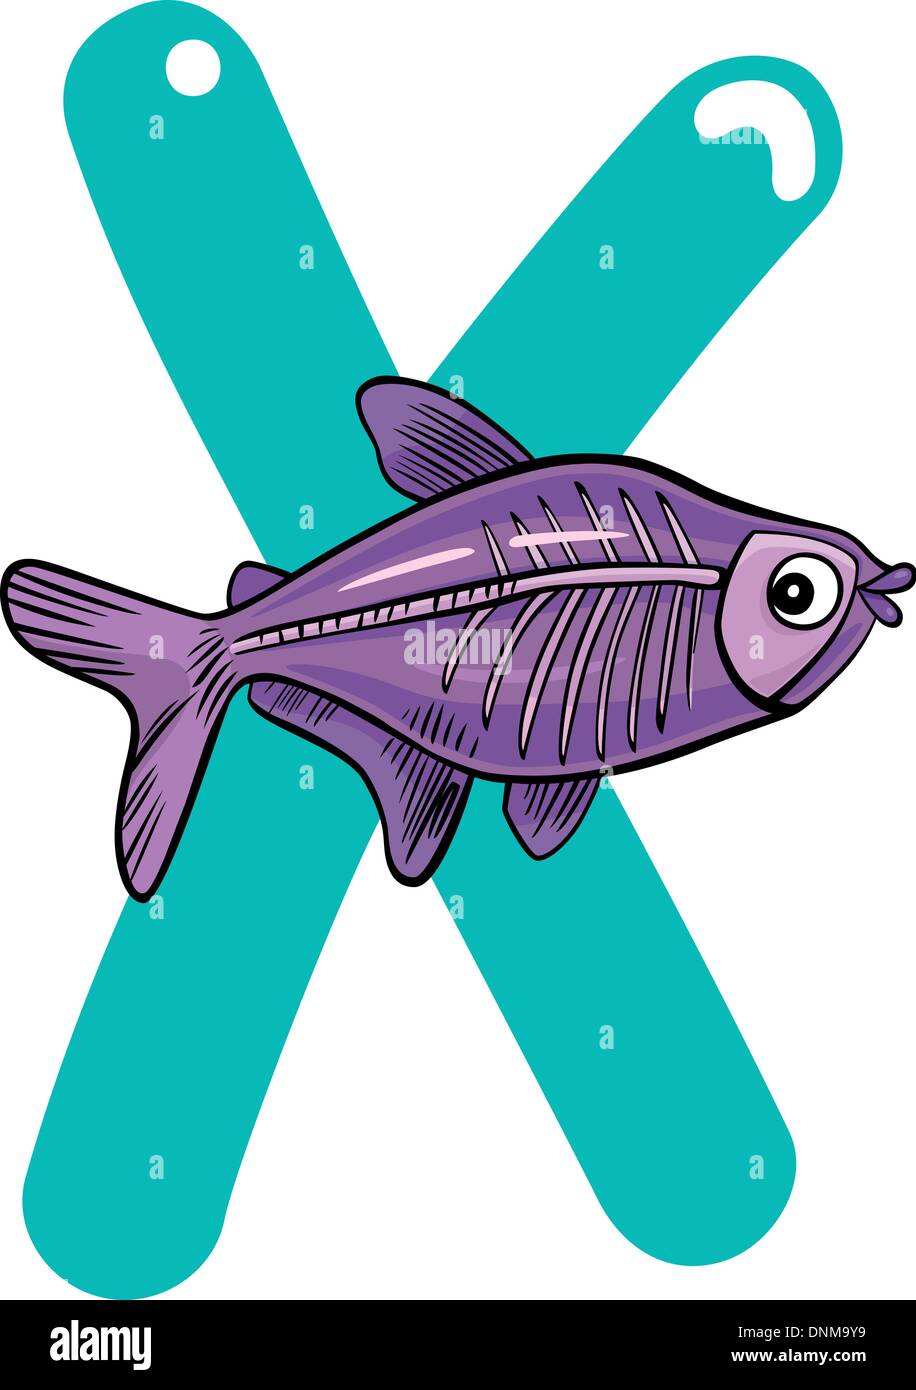 cartoon illustration of X letter for x-ray fish Stock Vector